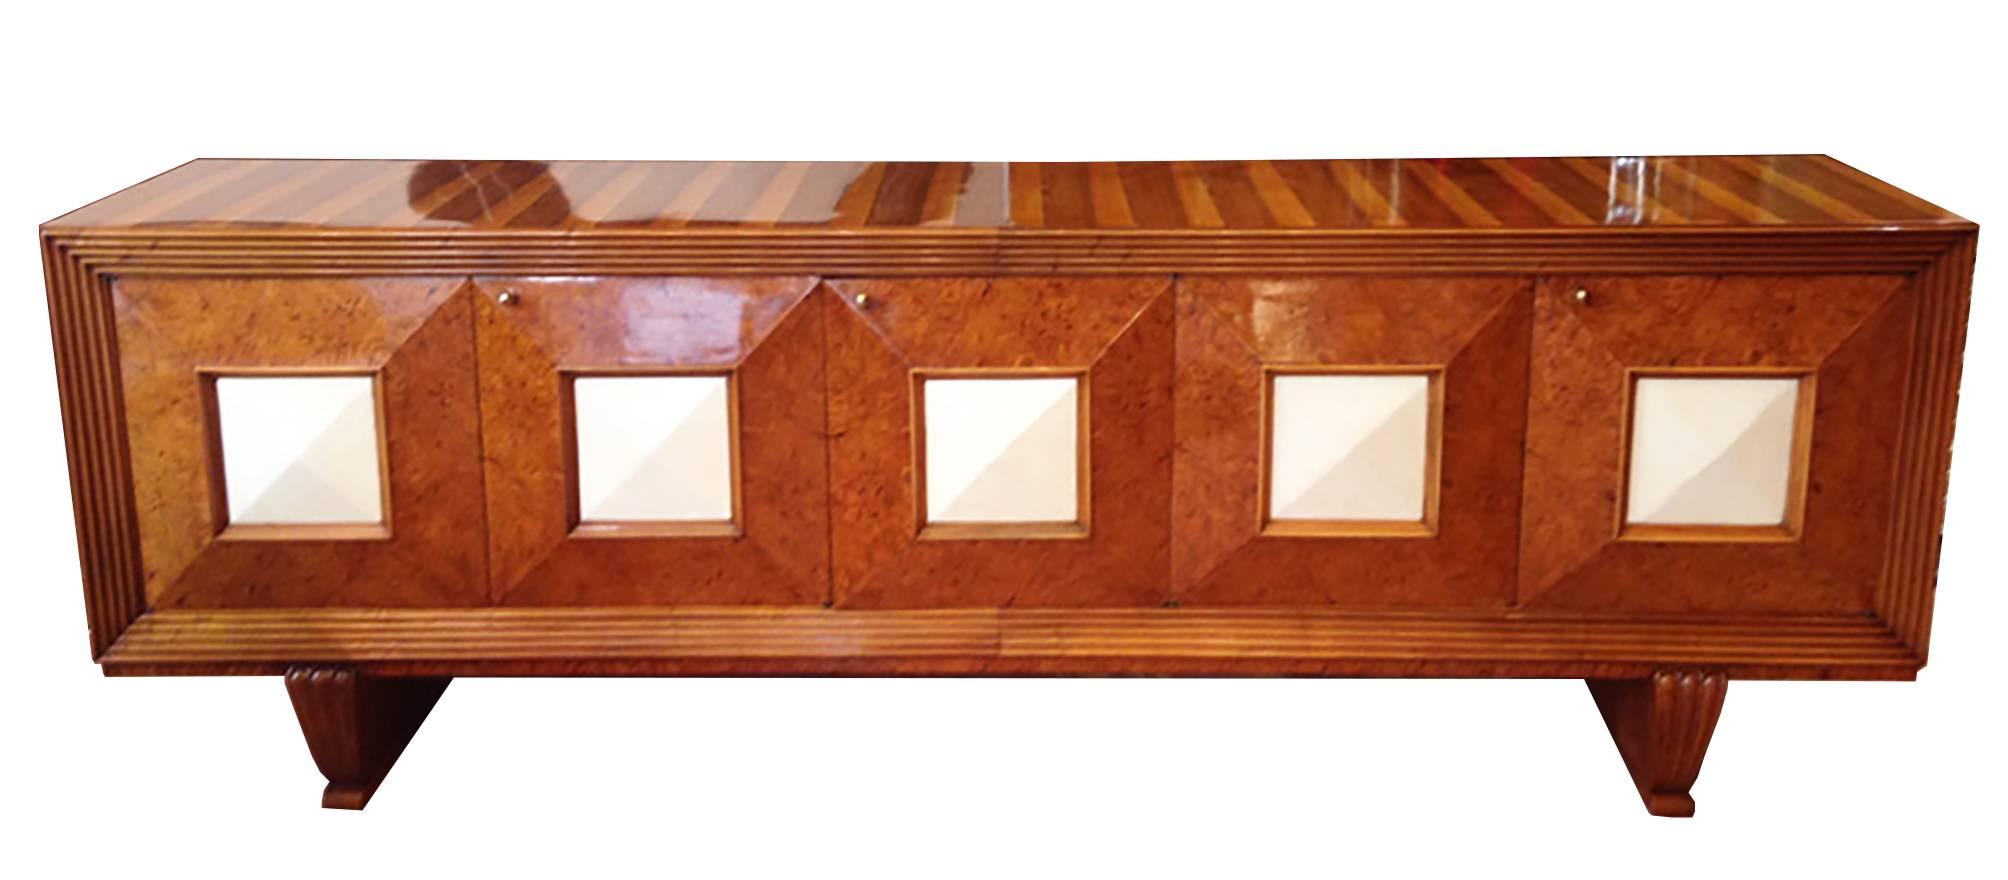 
Sideboard in briar-root and parchment, Pierluigi Colli, Turin, Italy, 1930s. Drawers and shelfes inside. Dimensions: 281.5 x 54.5 x 97 cm H.